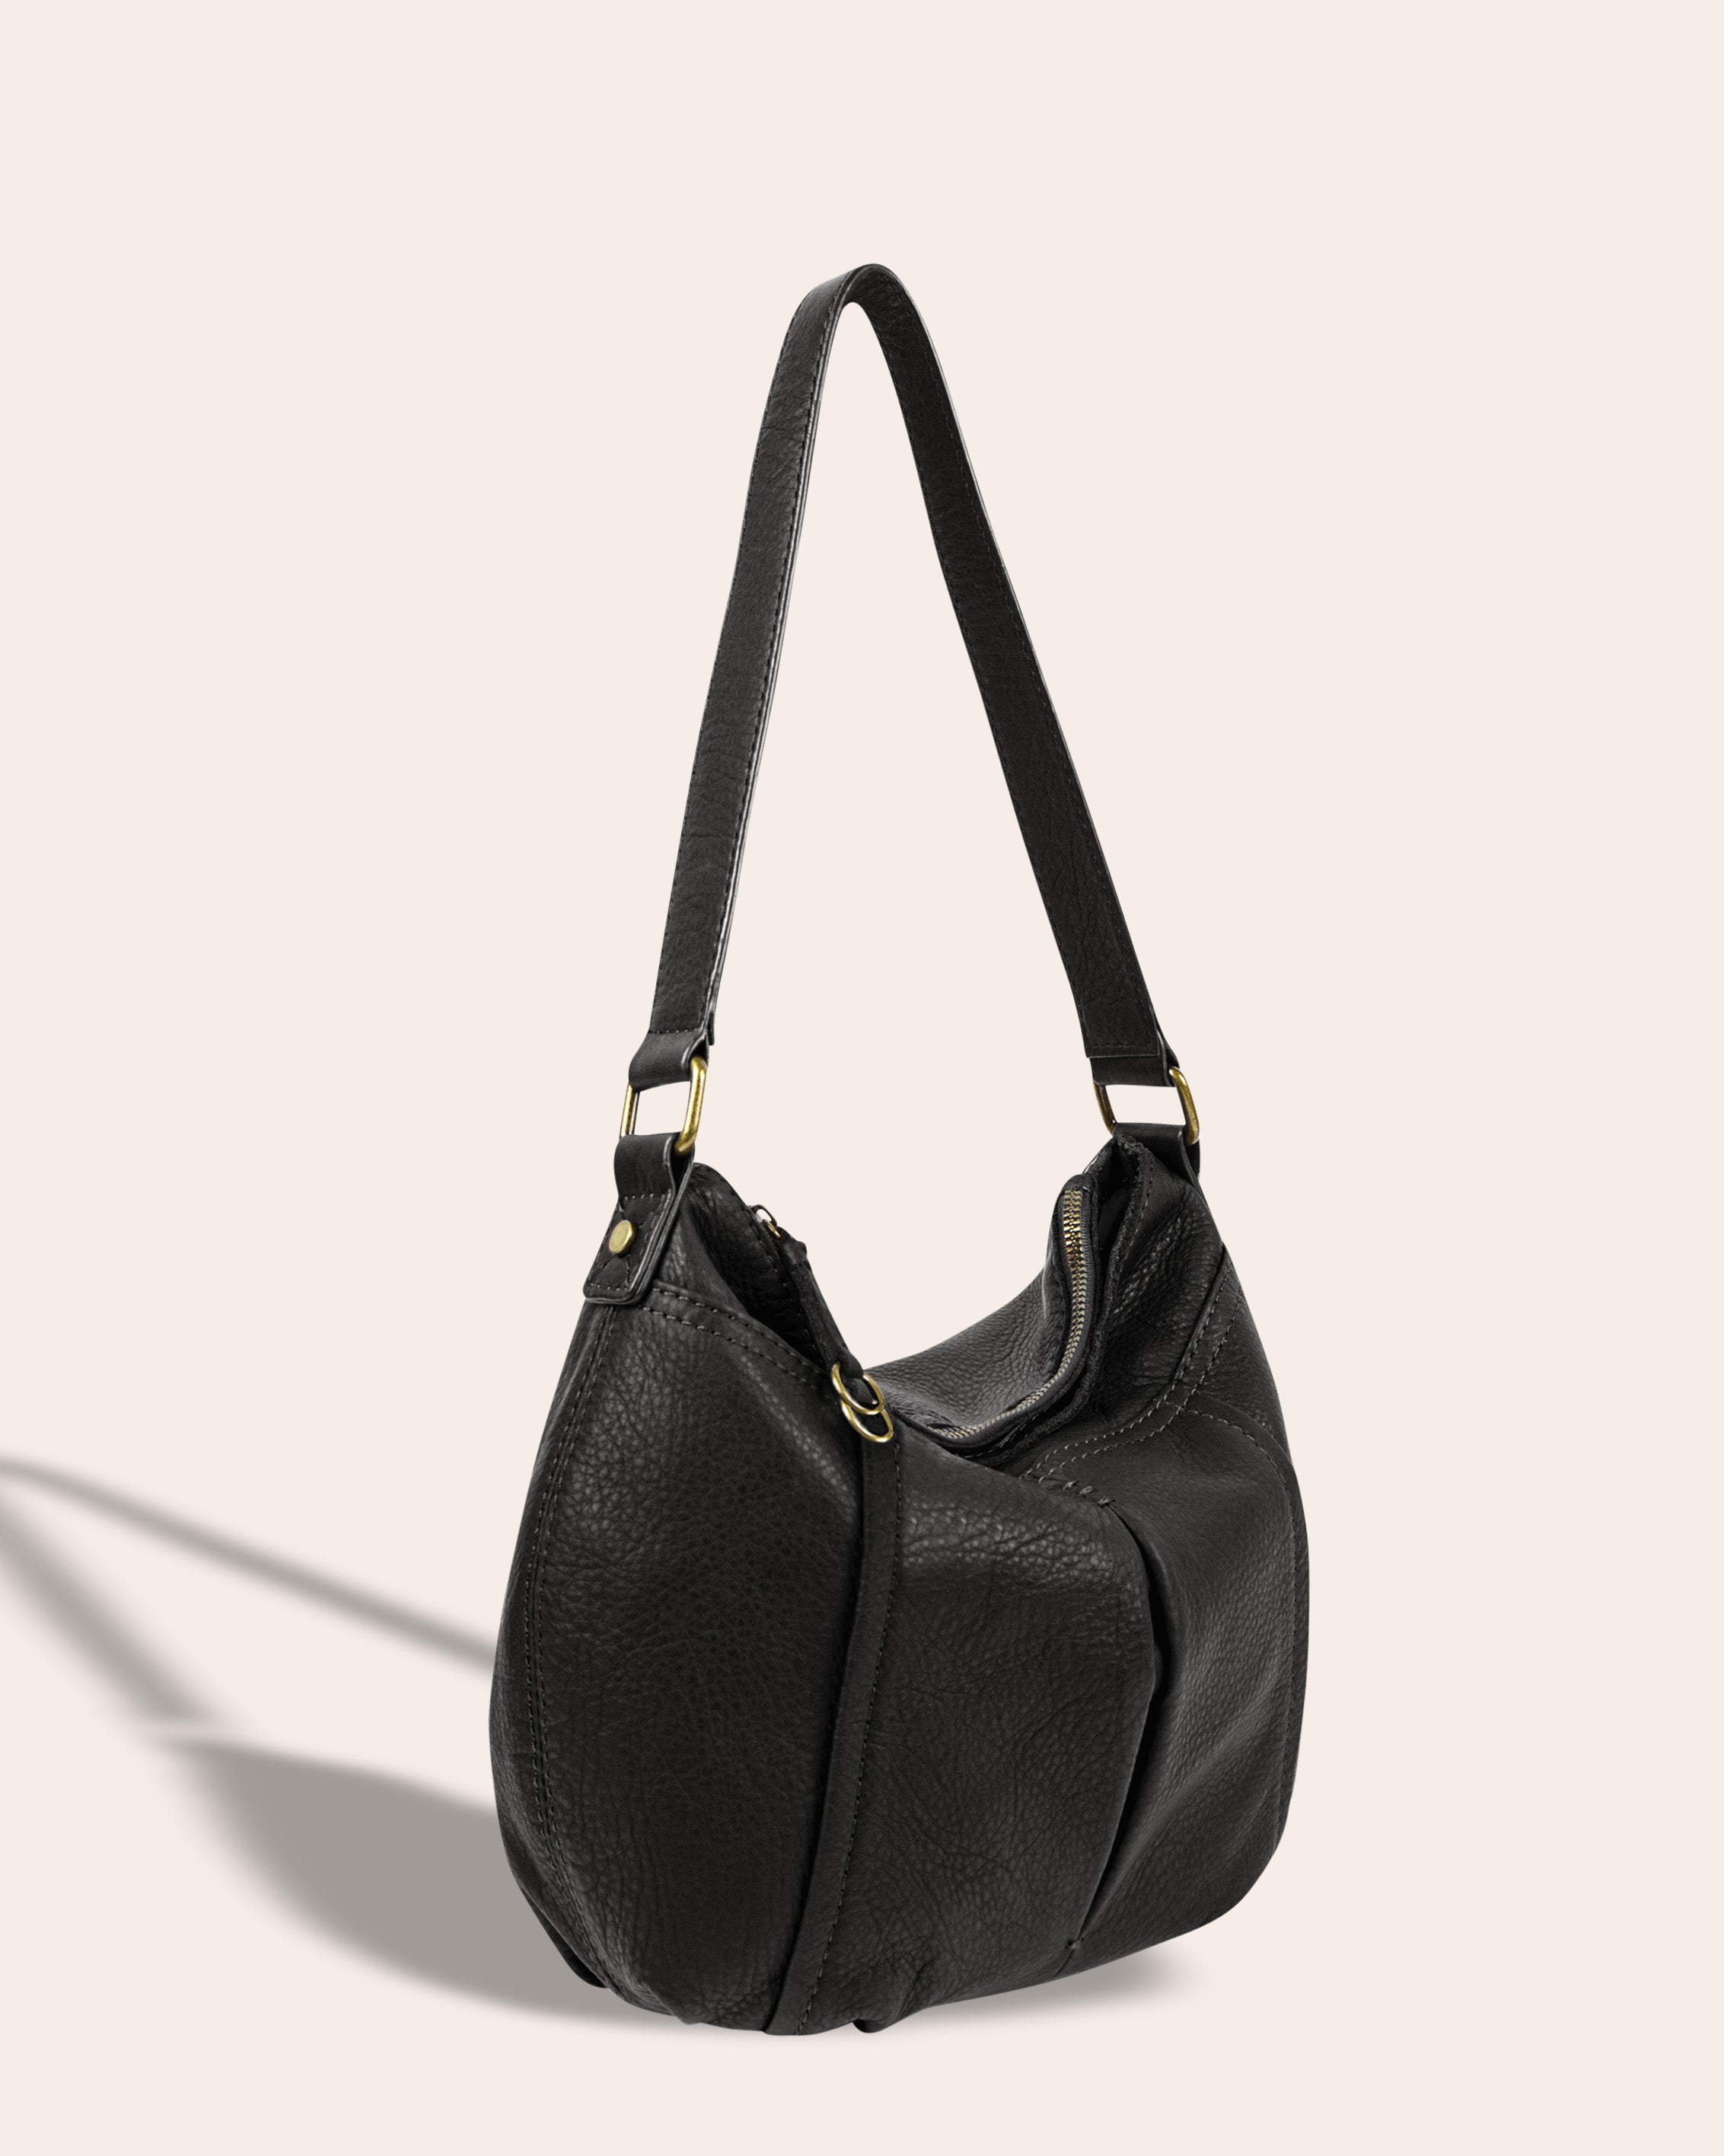 American Leather Co. Vienna Double Entry Hobo Stone